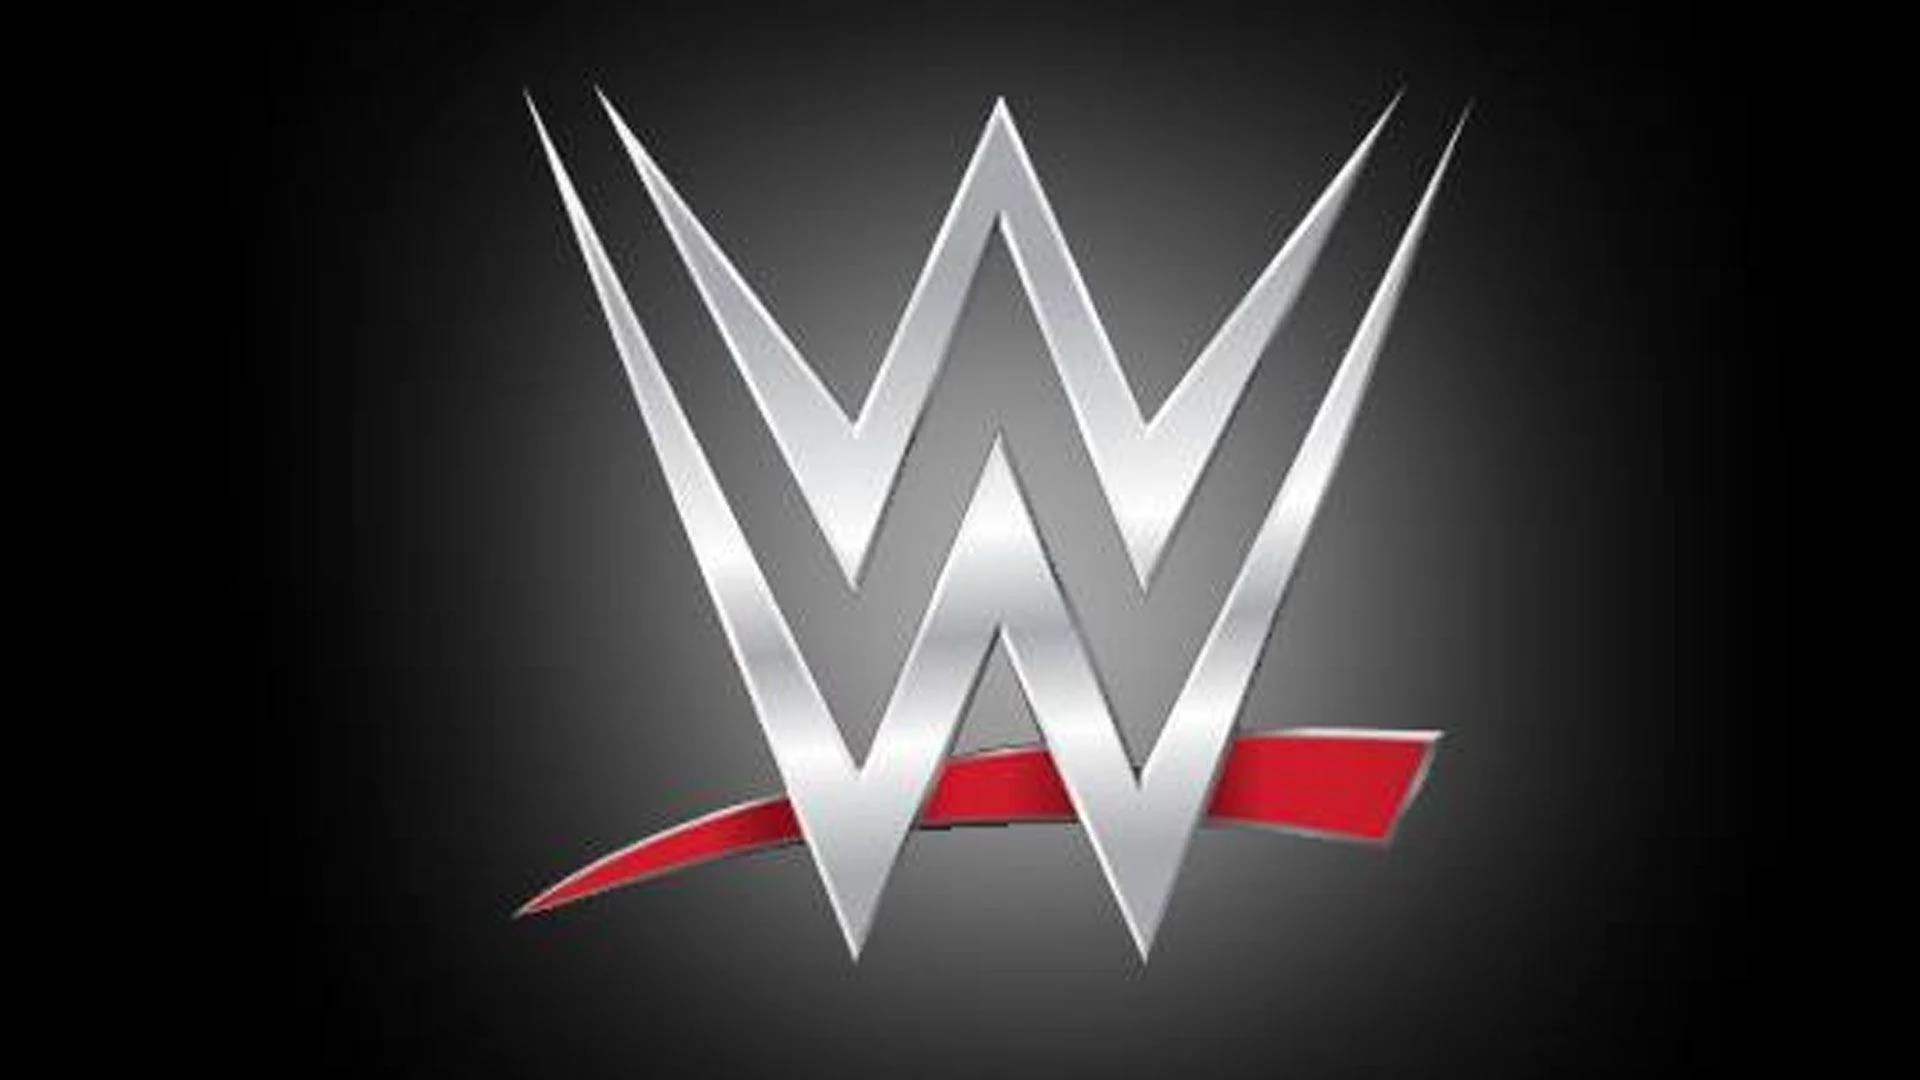 WWE Launches Sms Service: Know How to Get Updates on Your Mobile About Your Favorite Wrestling Stars Ft. John Cena, Roman Reigns and Others